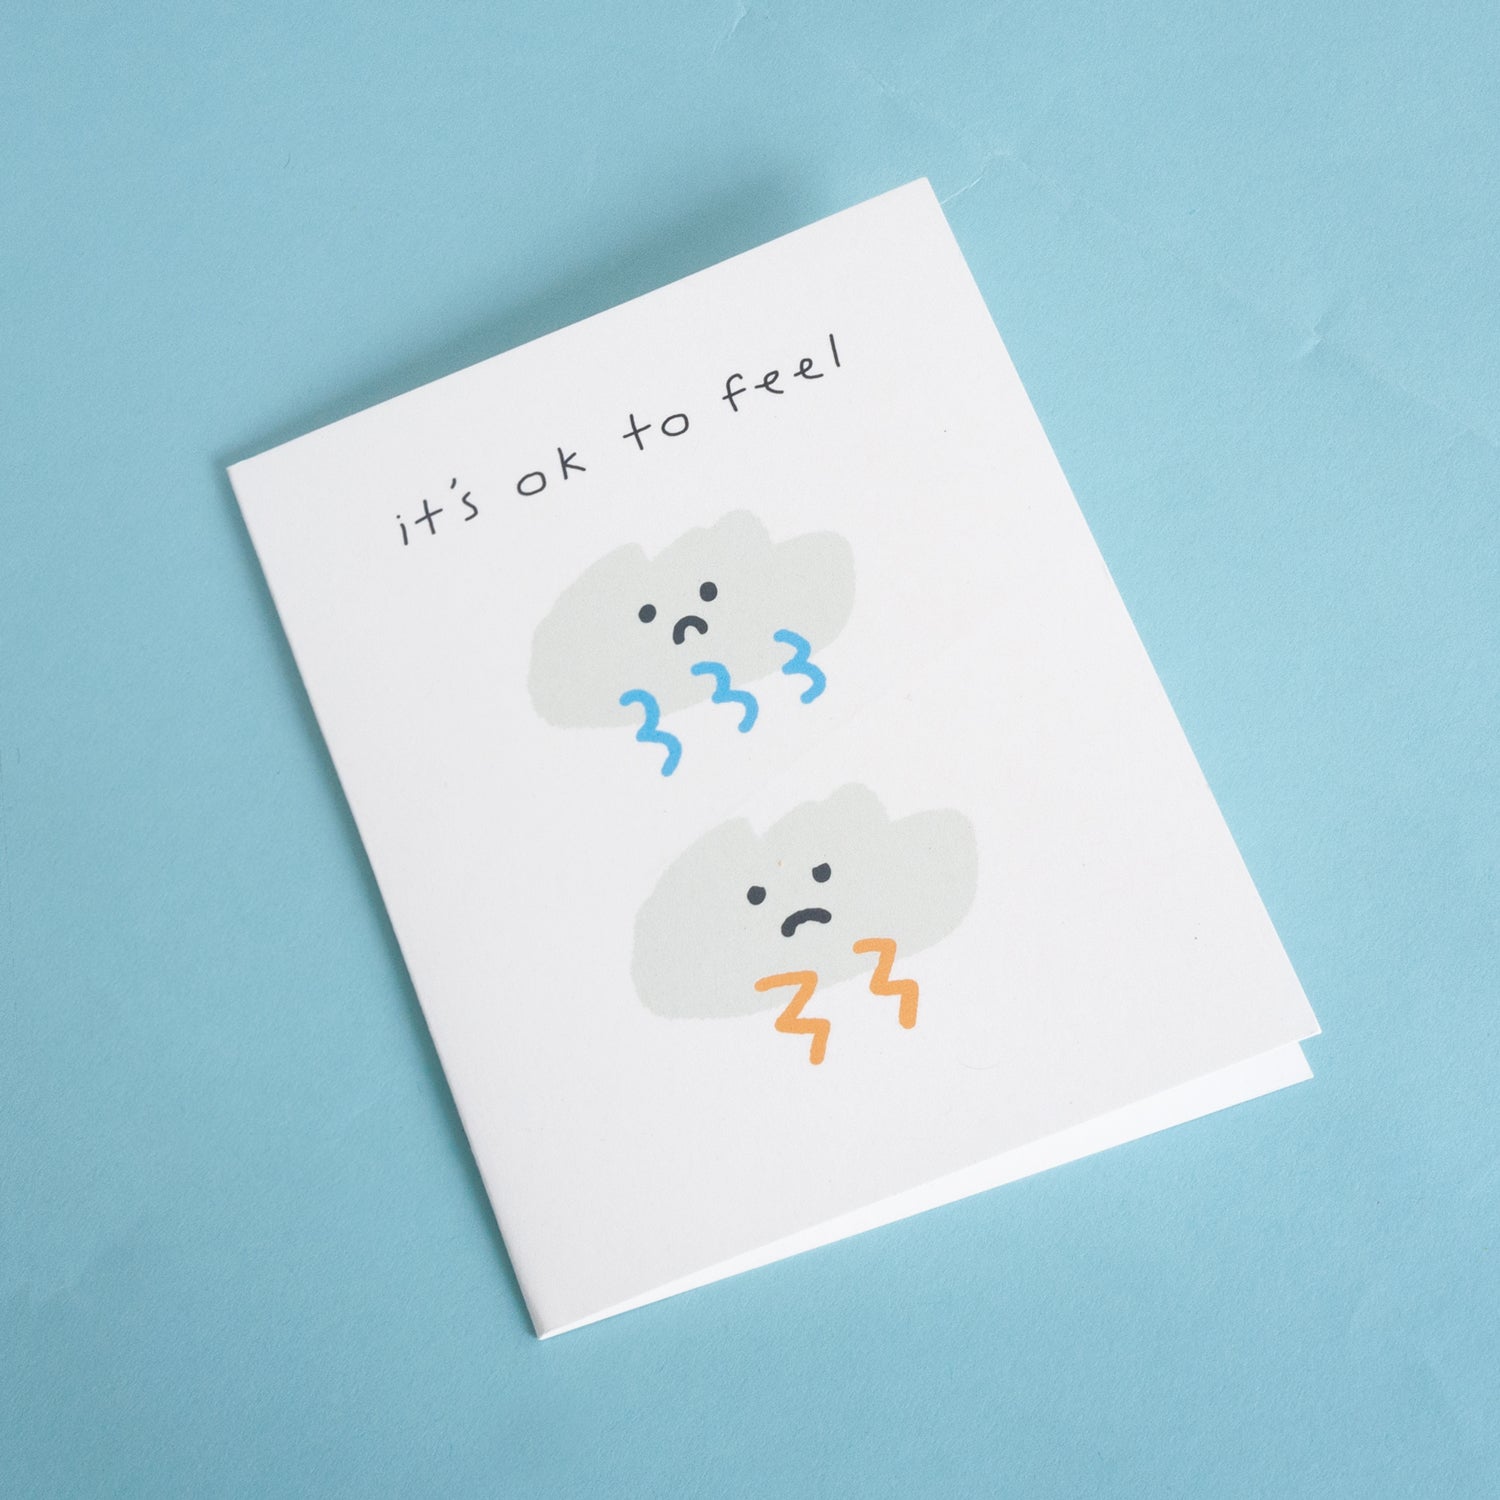 It's Ok to Feel | Eco-Friendly Greeting Card